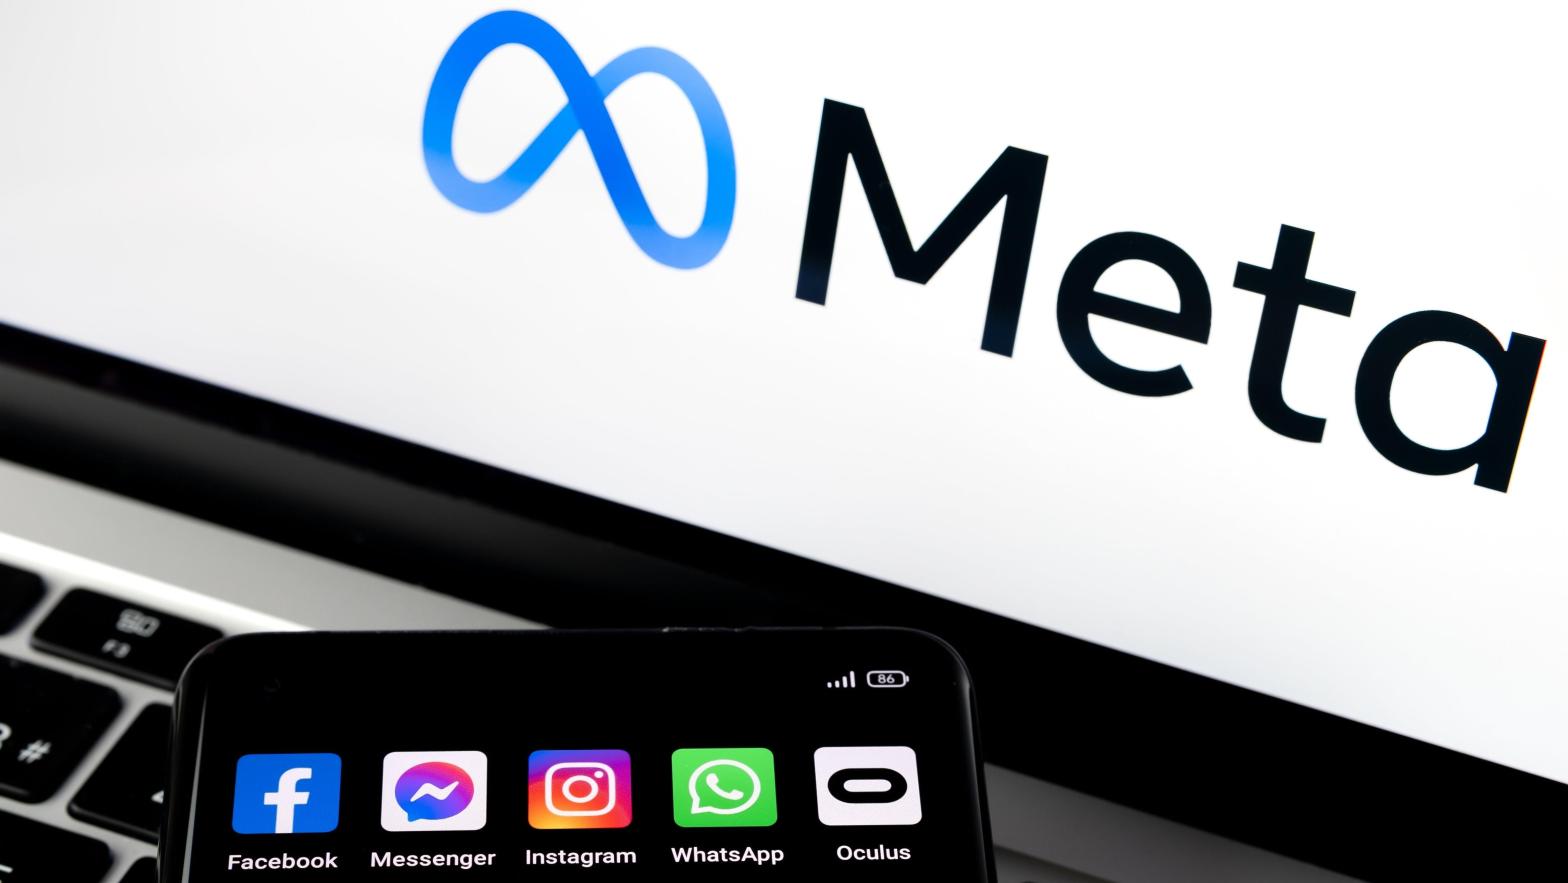 As much as Meta has gobbled up rival social apps and tech companies over the years, it's still trying to make the case that it isn't anticompetitive. (Photo: mundissima, Shutterstock)